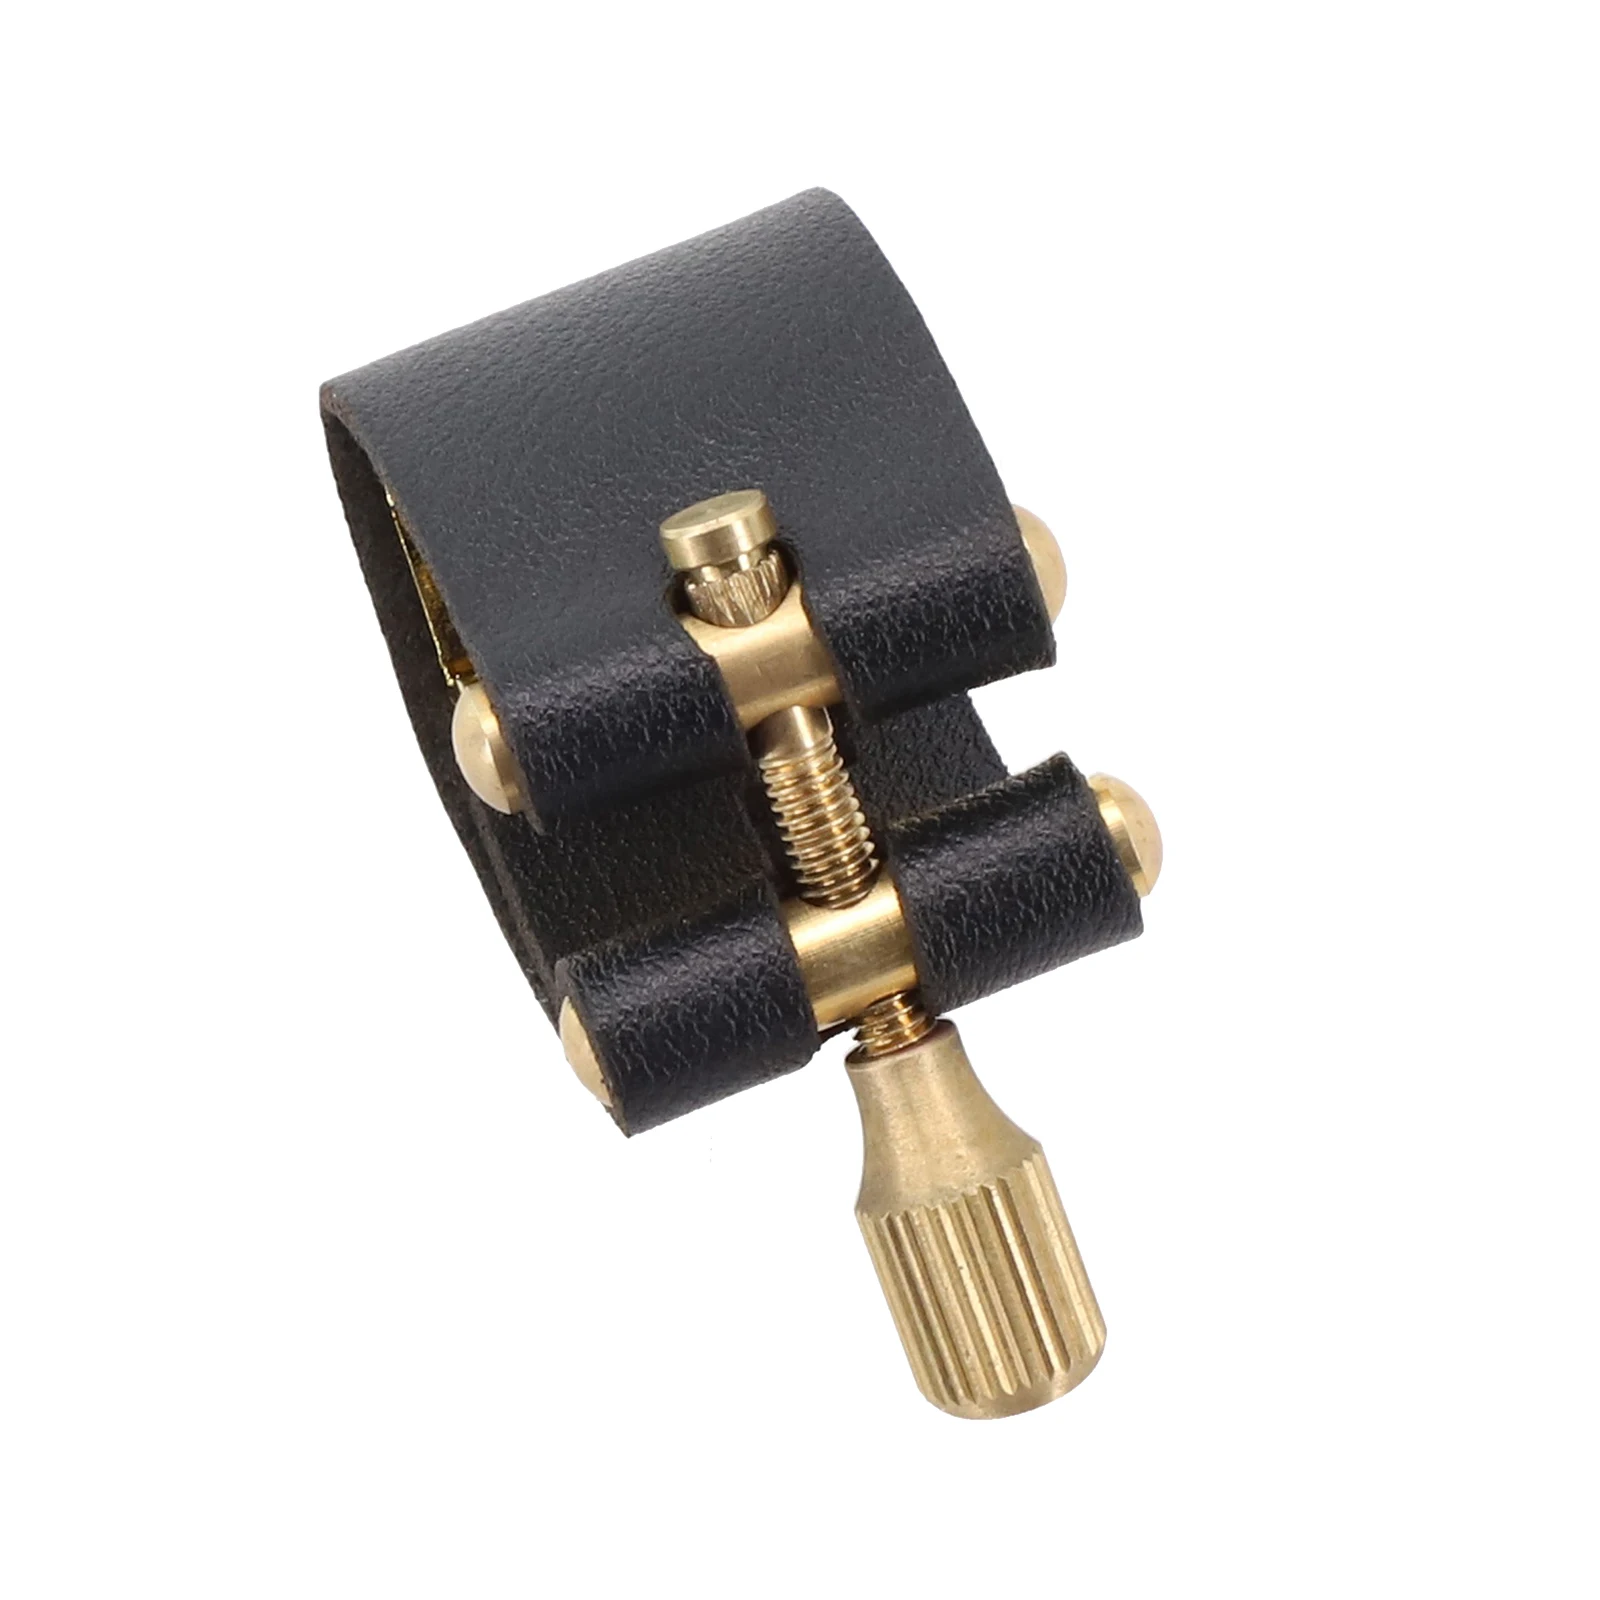 

For Alto Sax Saxophone Ligature Accessories Clip Compact Fastener Mouthpiece PU Leather+Metal Practical Brand New